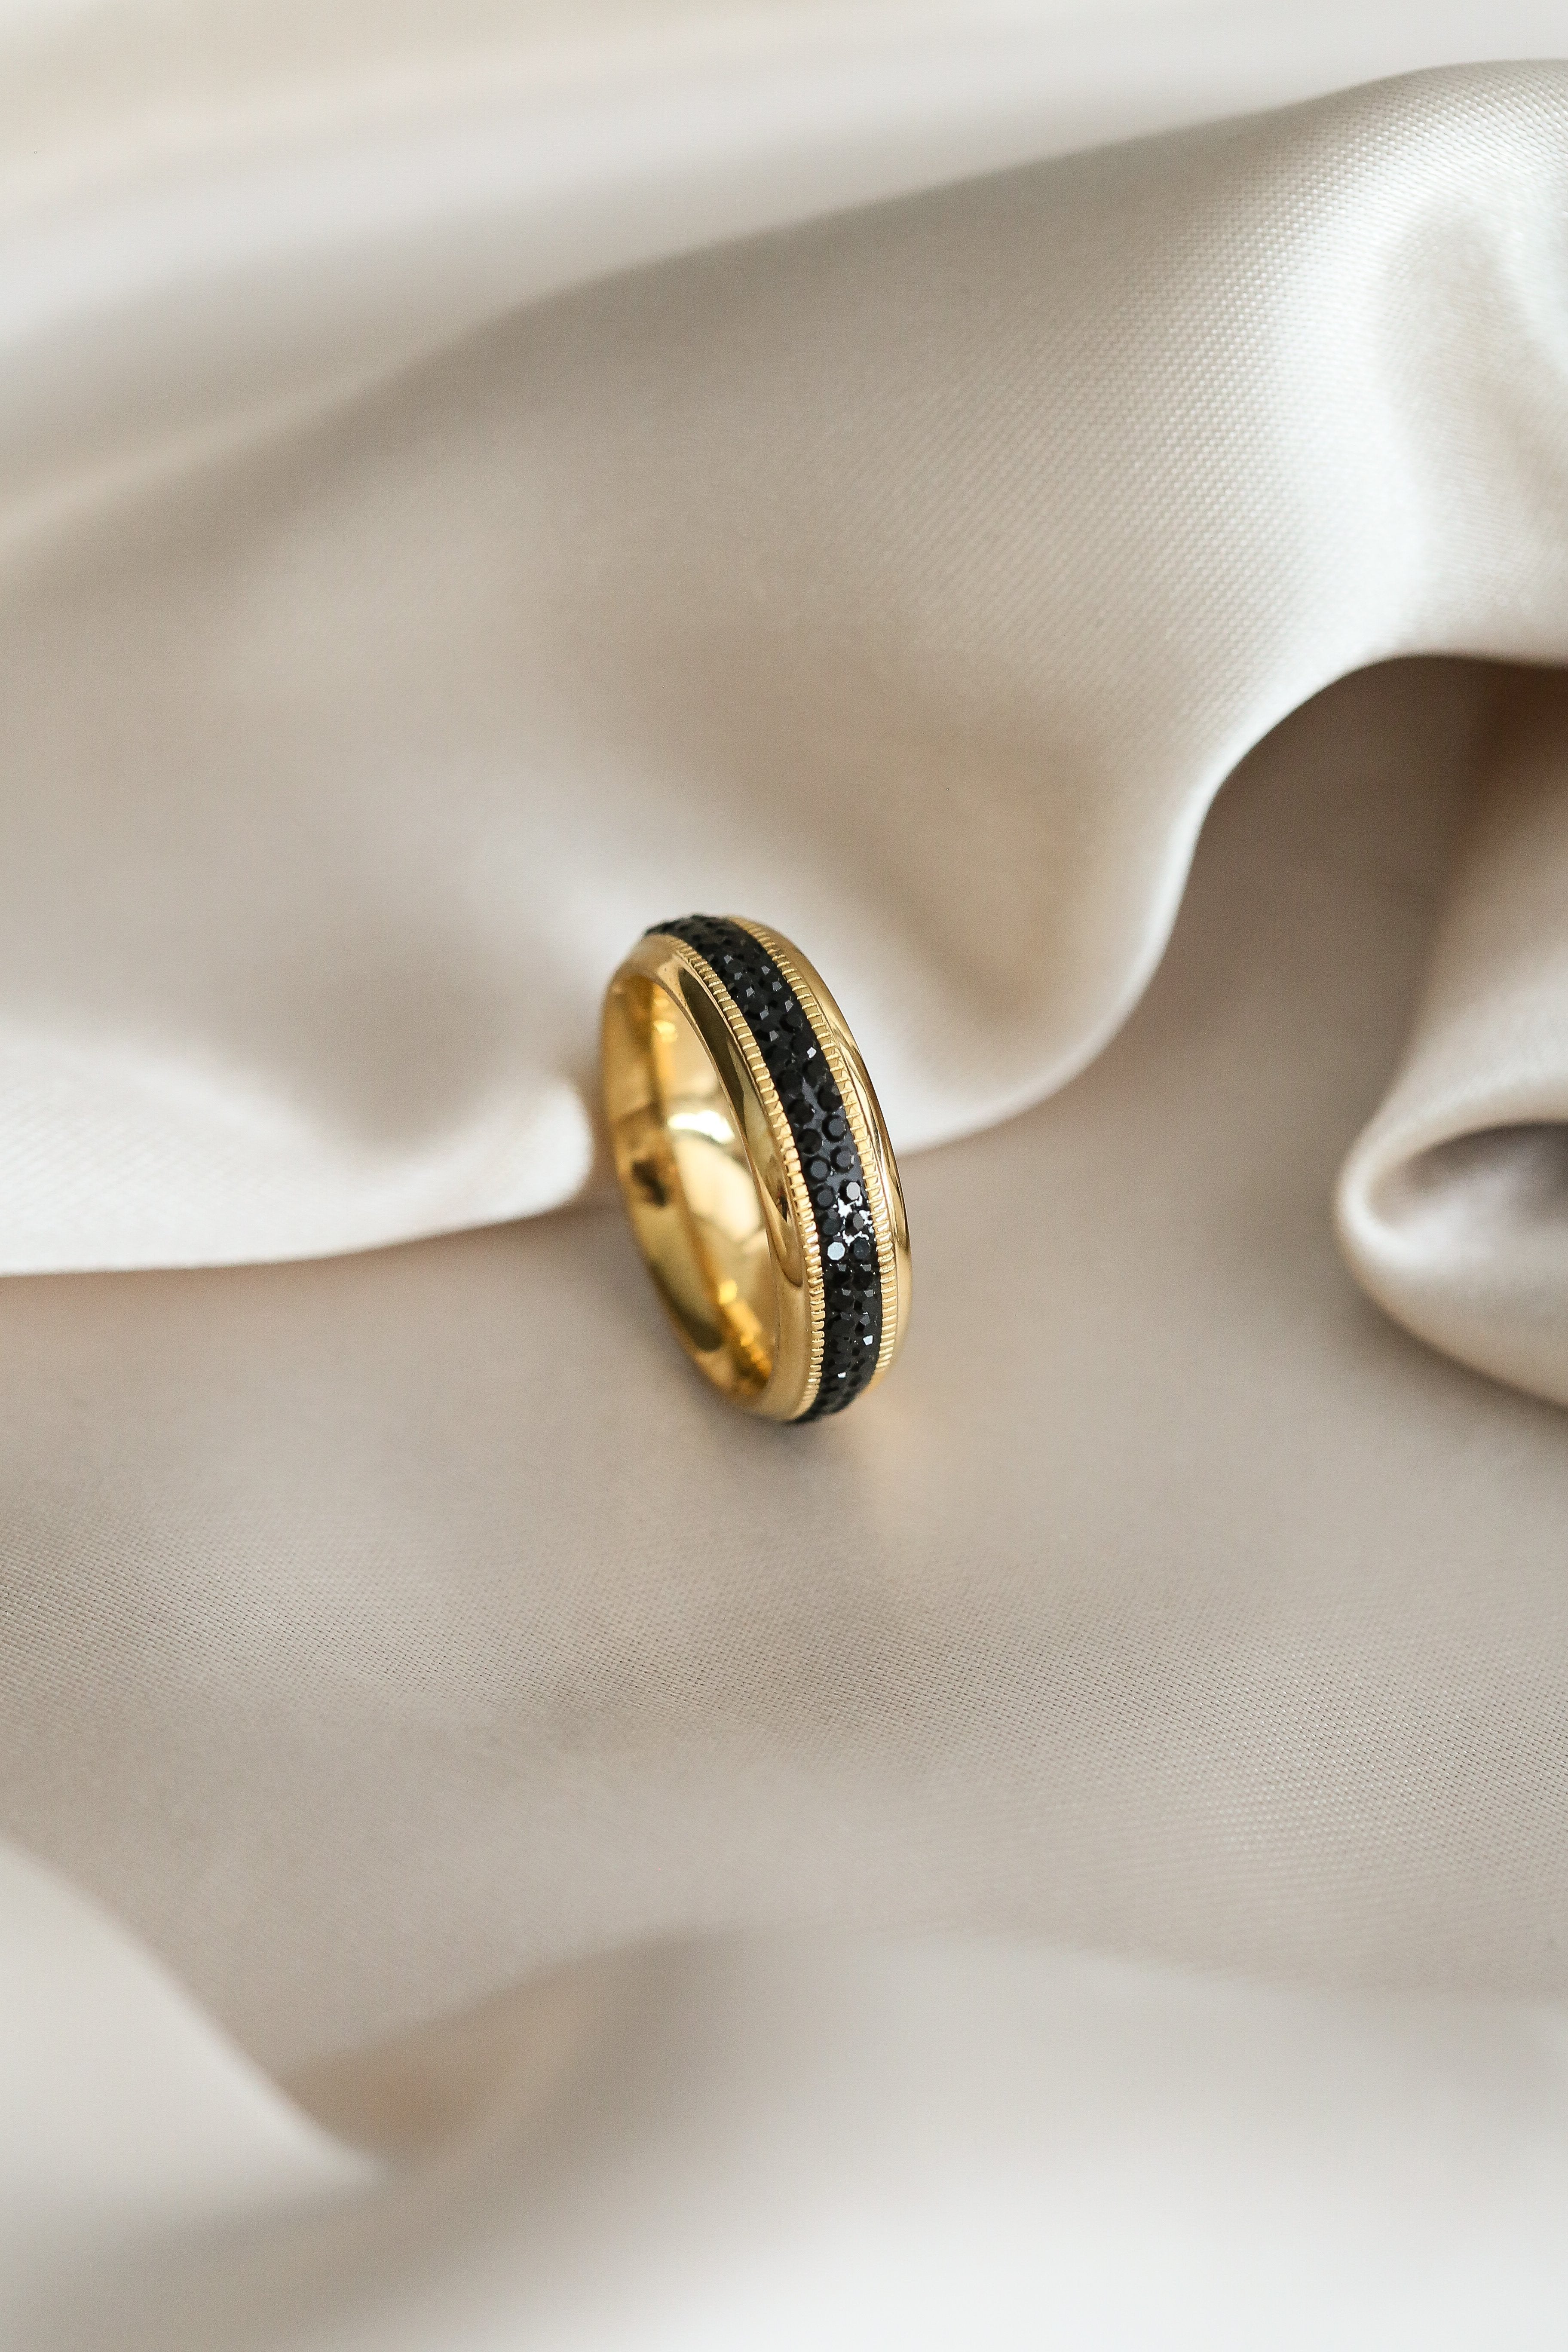 Desirèe Ring - Boutique Minimaliste has waterproof, durable, elegant and vintage inspired jewelry